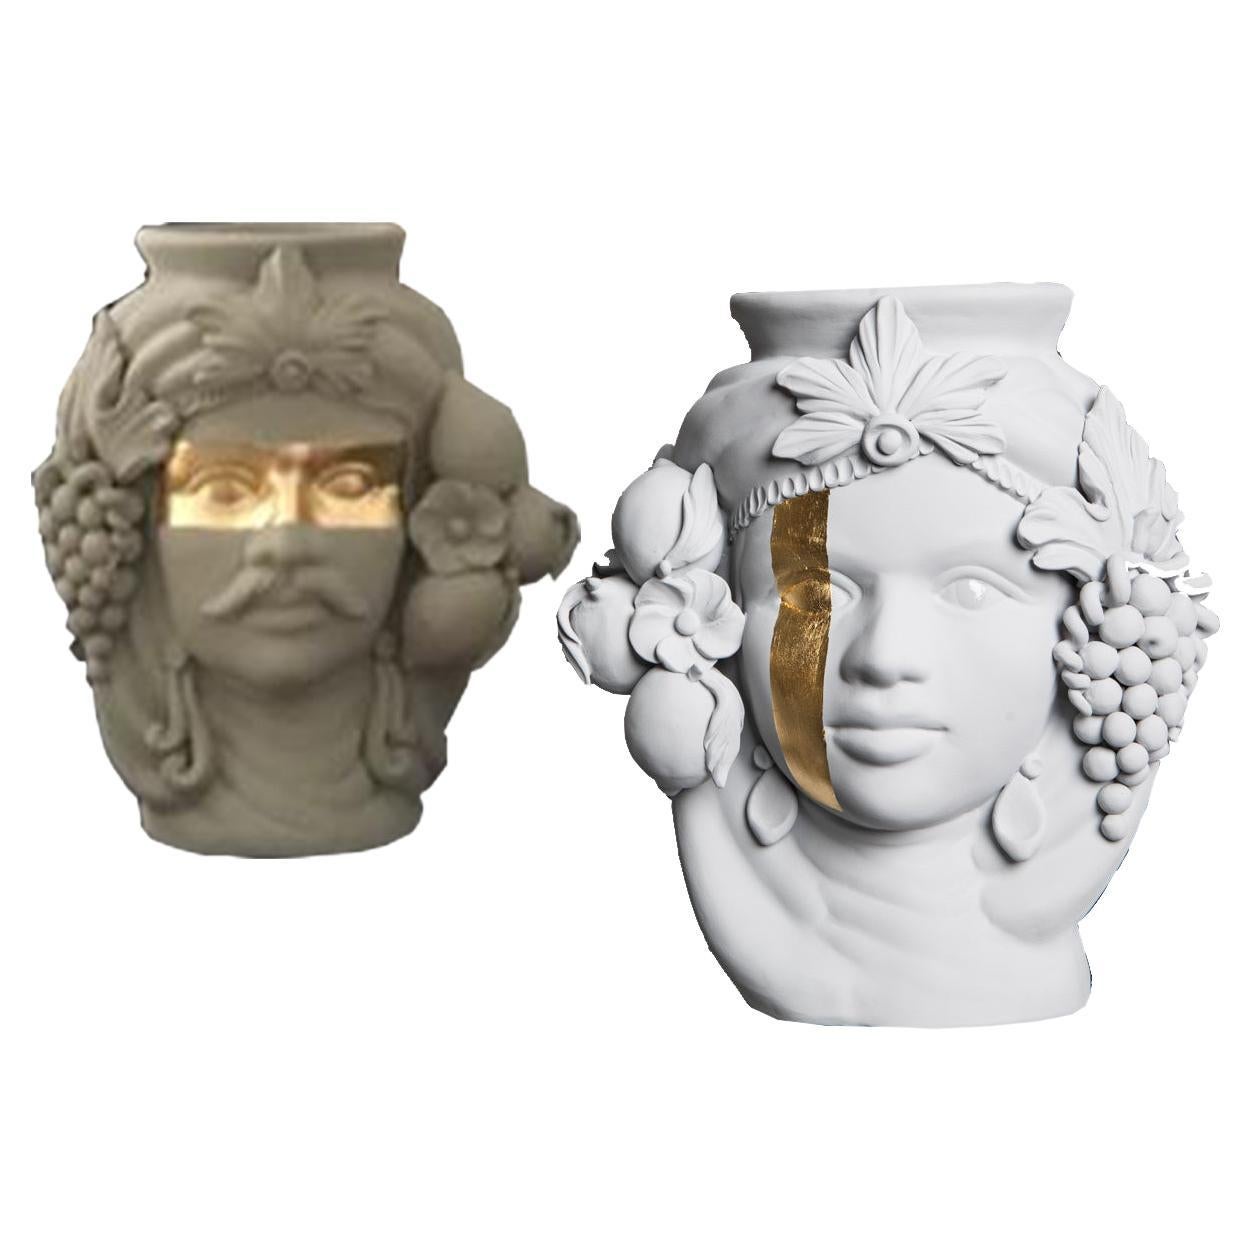 Moorish Heads Vases Collection "Palermo White", Set of 2, Handmade in Italy For Sale